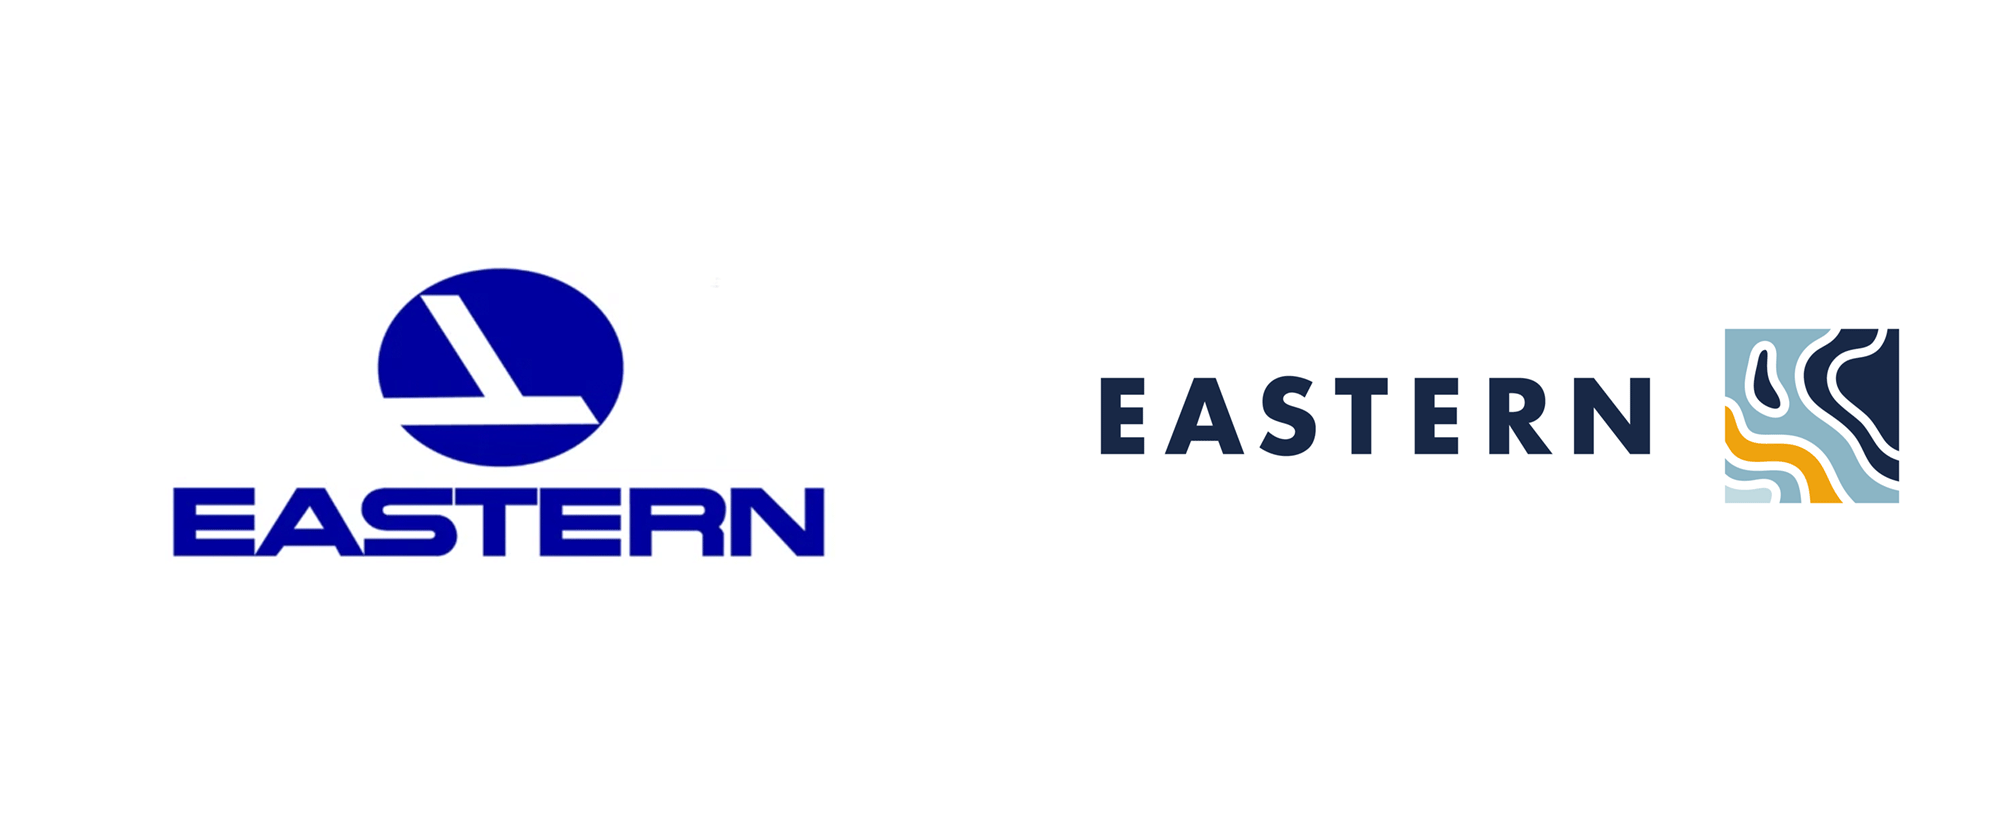 New Logo, Identity, and Livery for Eastern by Mechanica